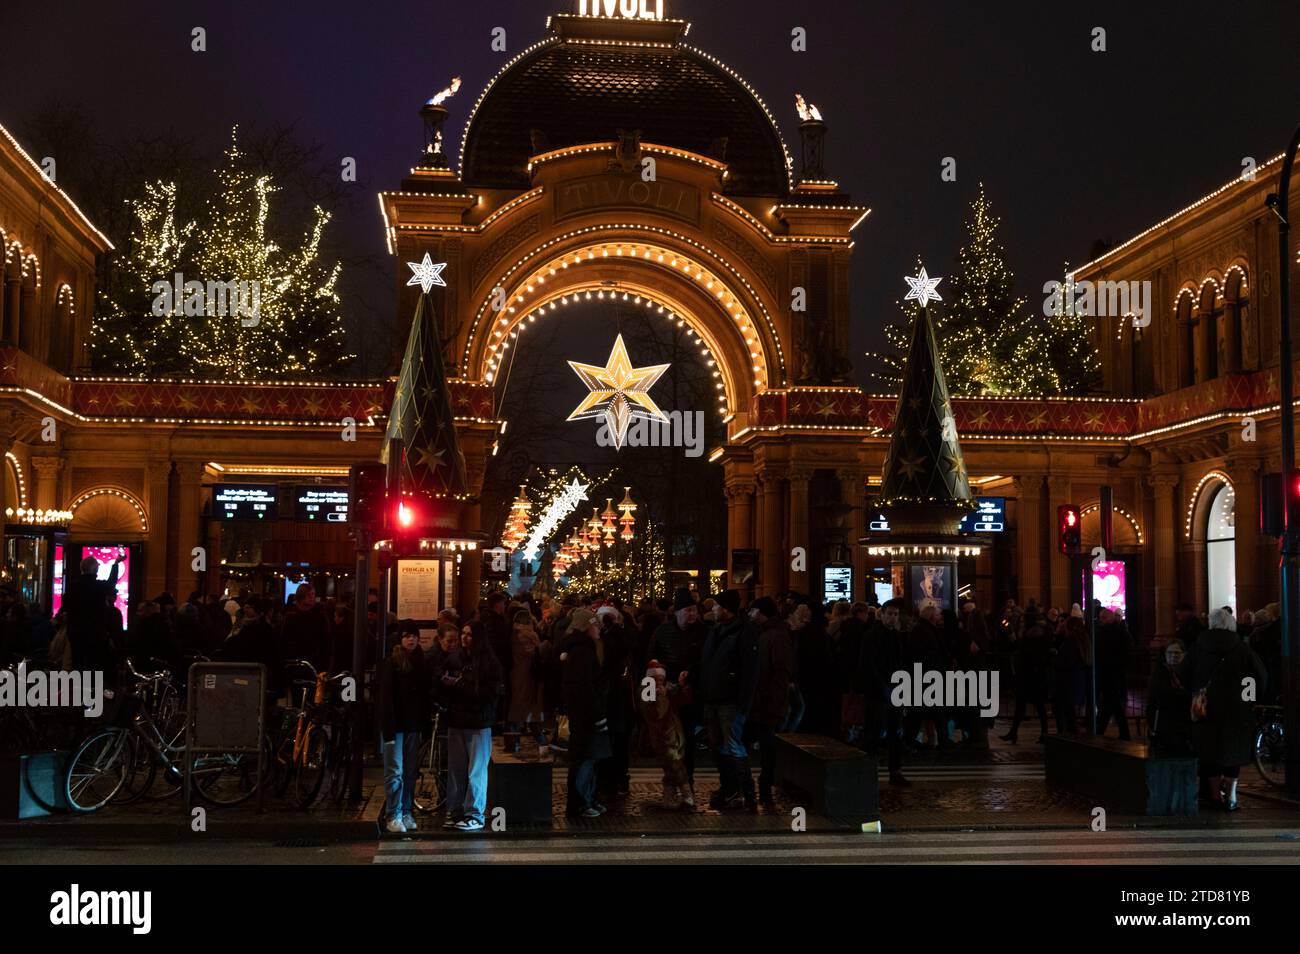 Large crowds gather at the main entrance to the Tivoli Gardens as part of the Julemarked (Christmas market) in Copenhagen, Denmark. Stock Photo